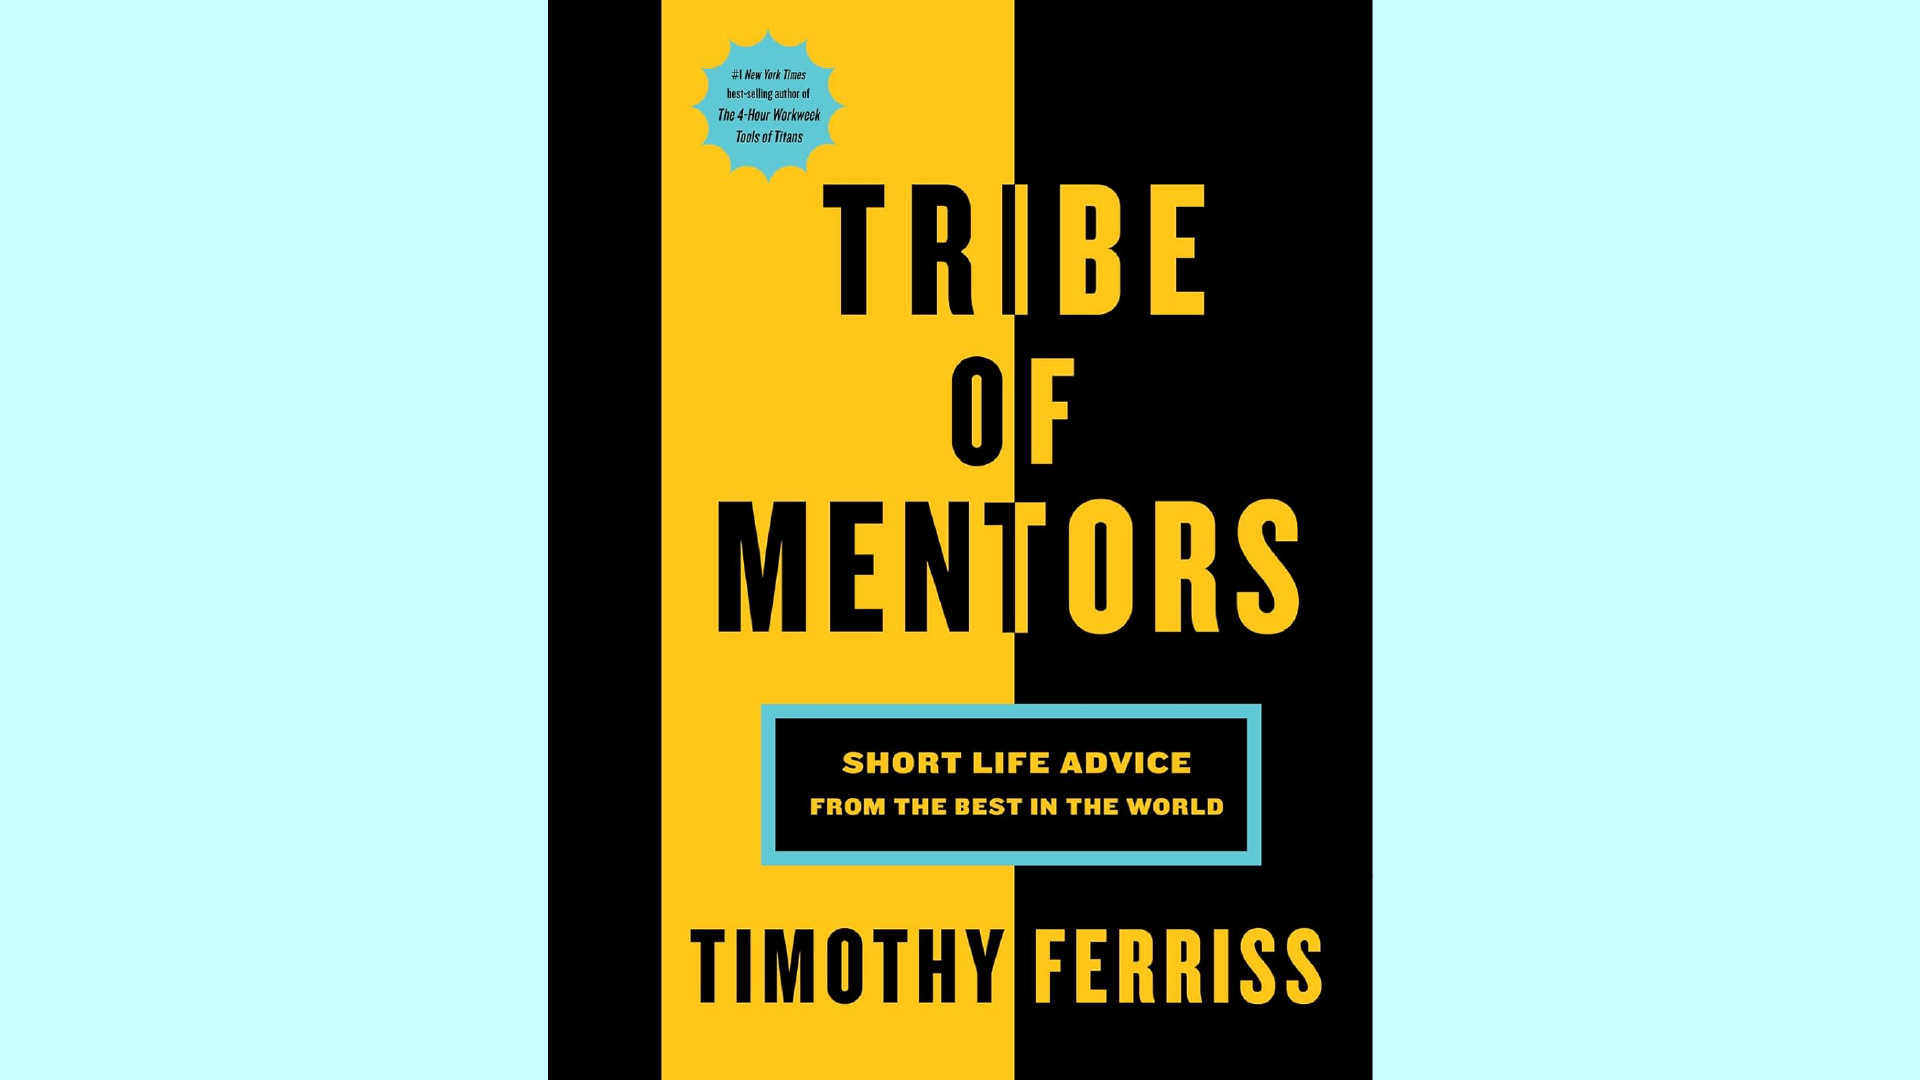 New Episode Alert! Dive into the Insights of “Tribe of Mentors” by Tim Ferriss 🚀